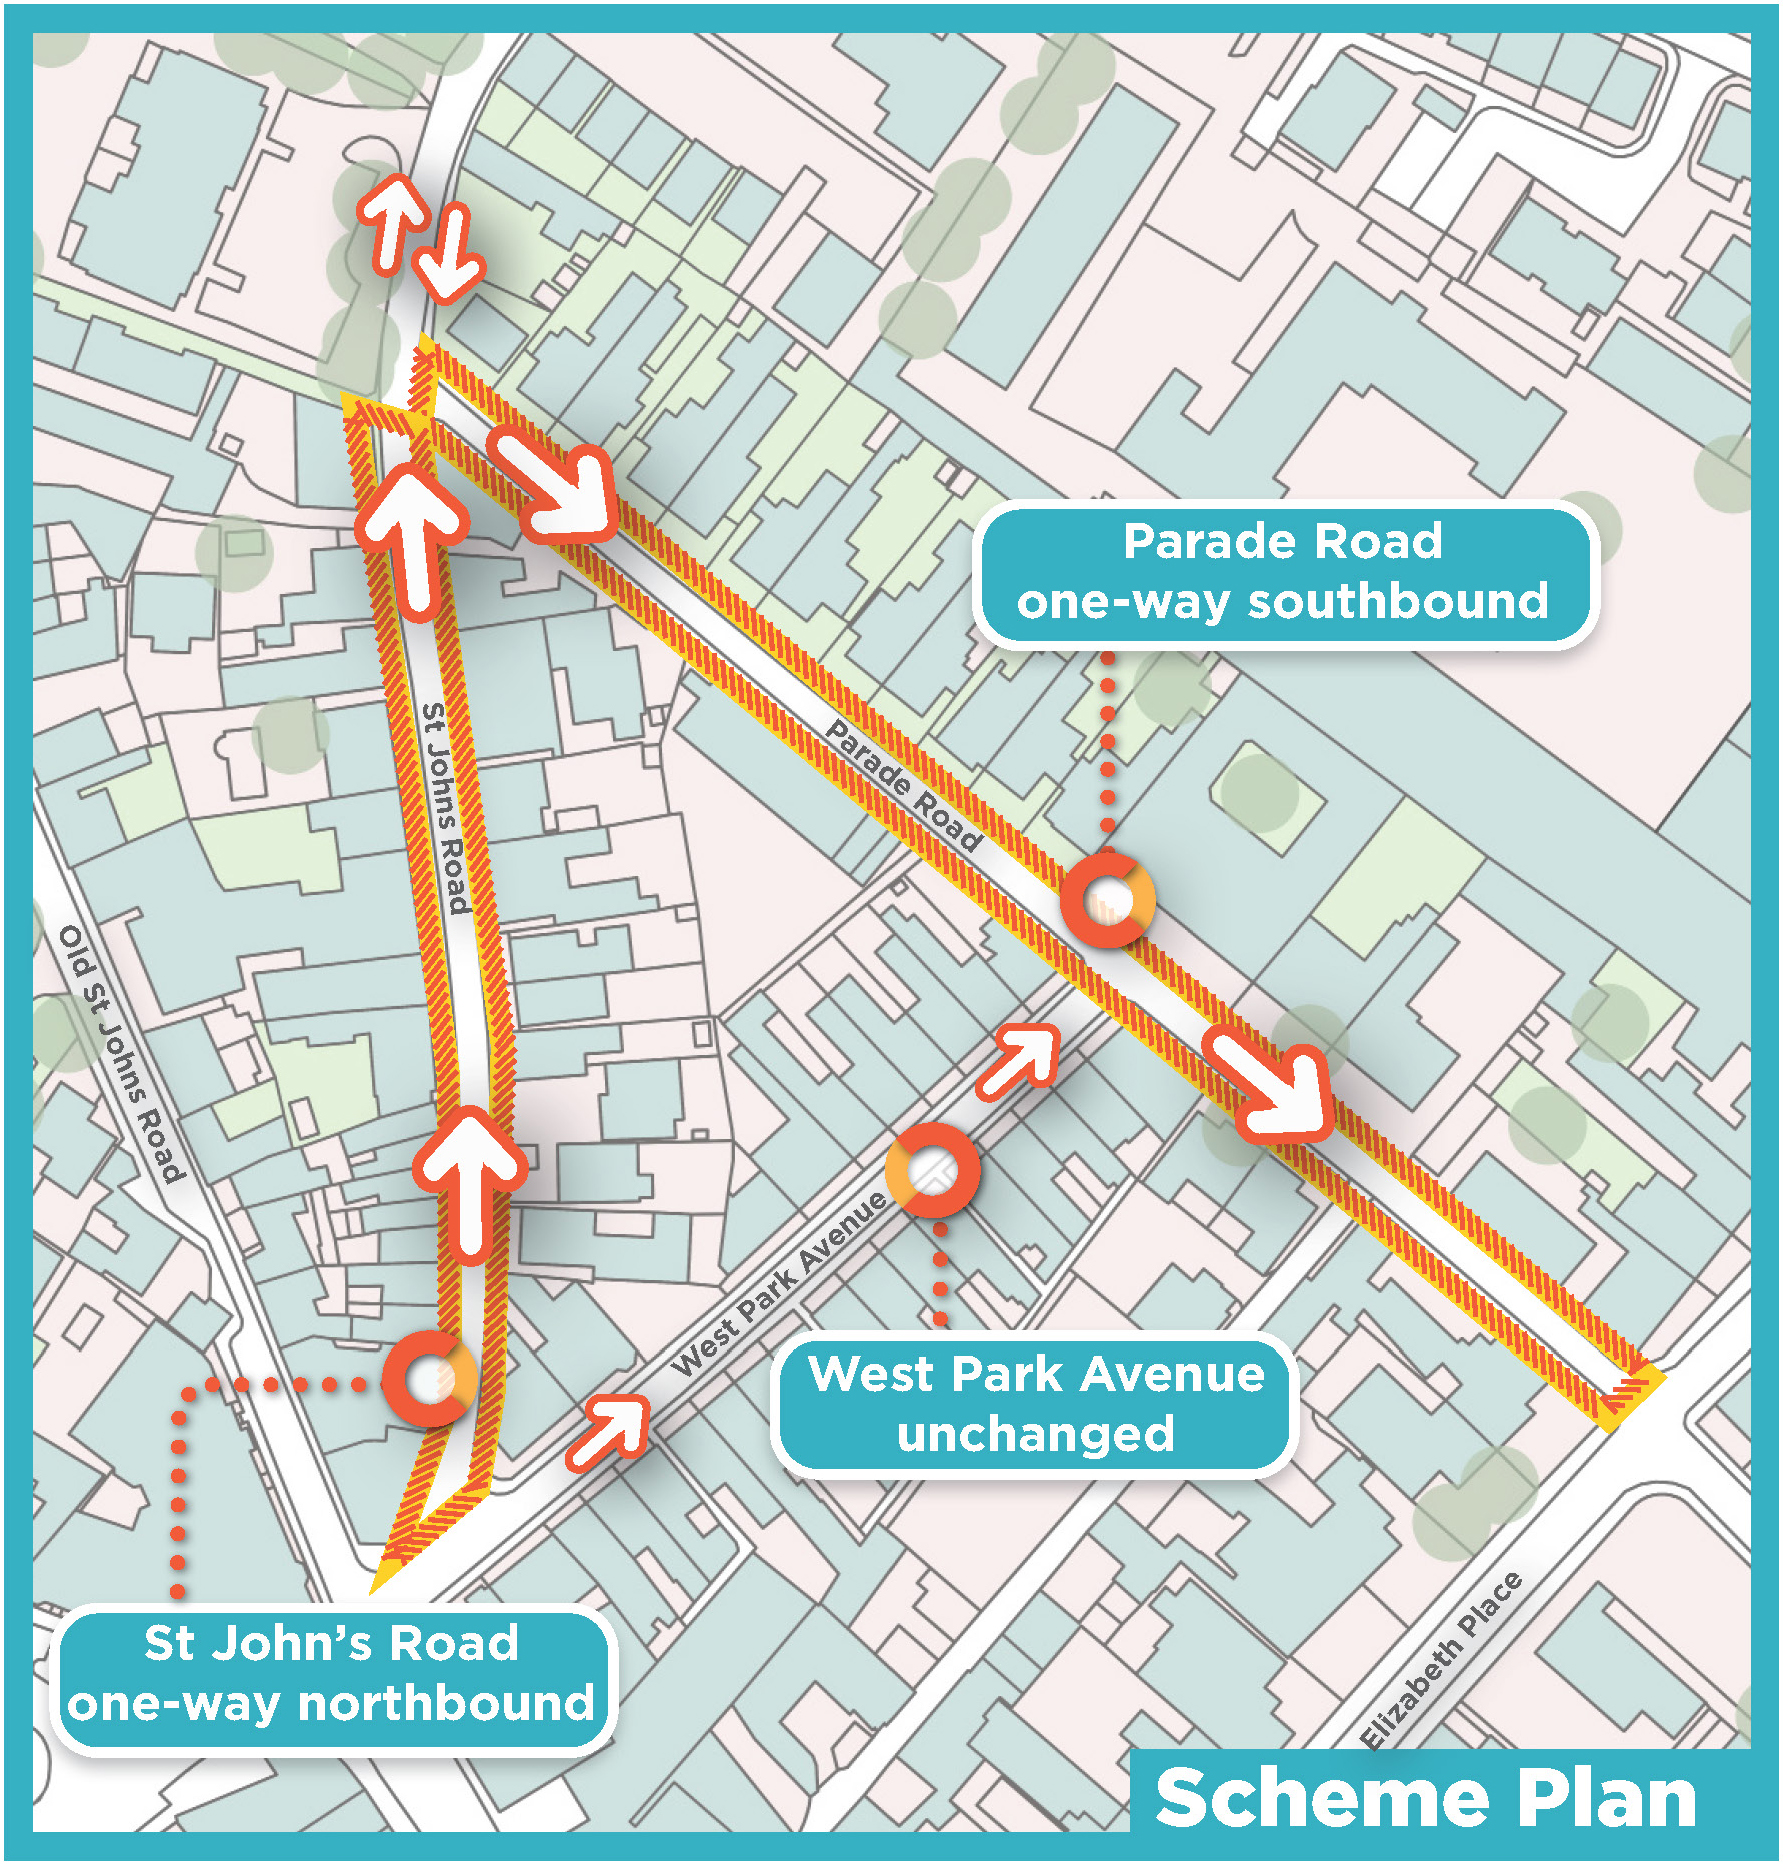 Map showing the 3 month trial one way traffic northbound on the lower part of St John's Road until the junction with Parade Road, the one way traffic southbound along Parade Road and no change to the traffic on West Park Avenue.